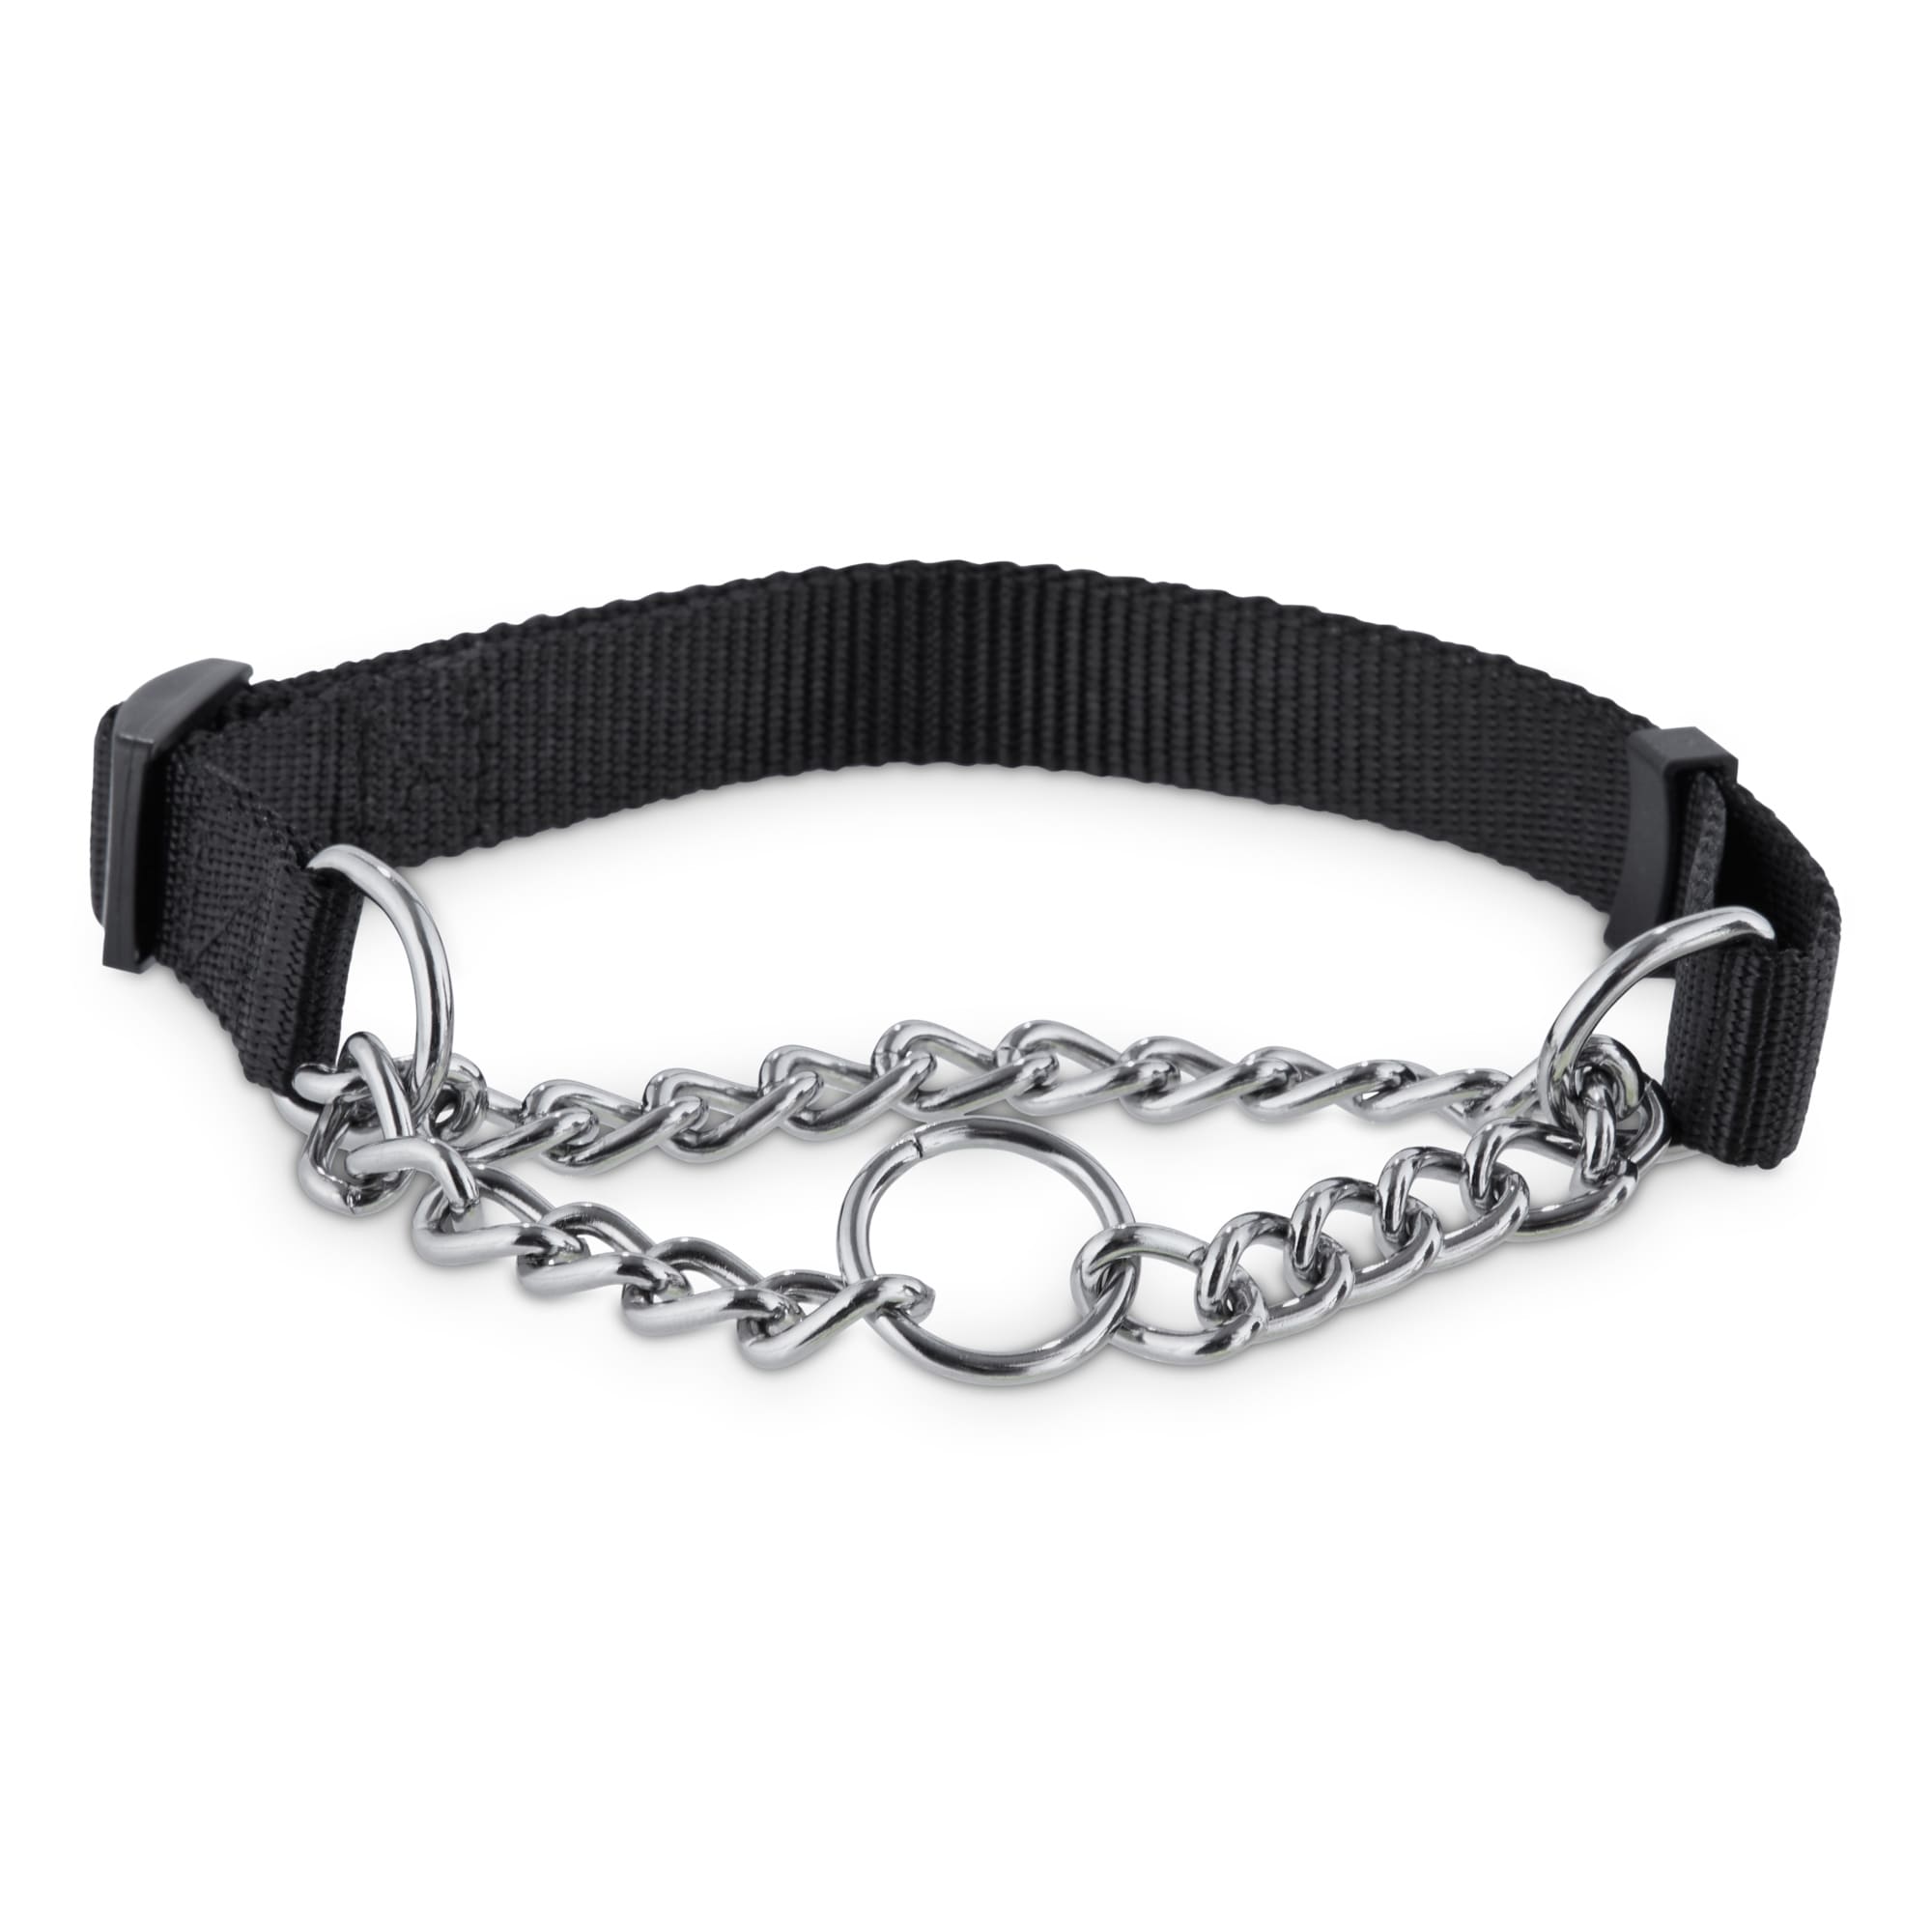 Black Leather Collar Chain Choker w/ 3 Large Rings